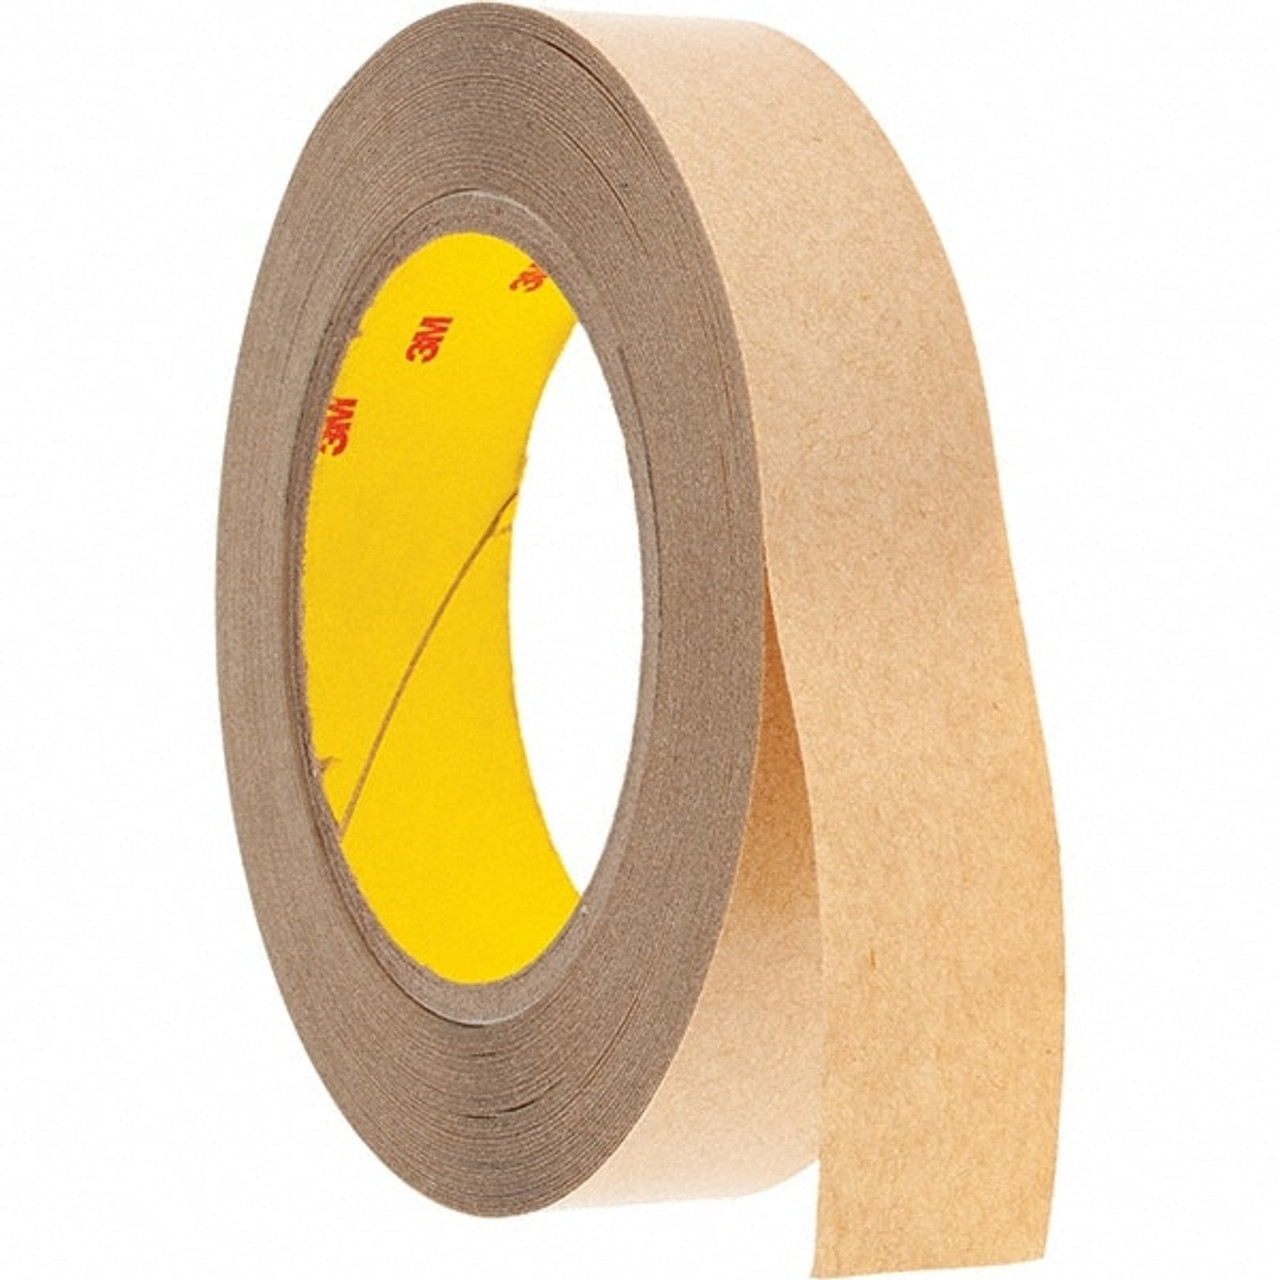 3M 9415PC Removable Double Sided Film Tape - 1/2 x 72 yds. for